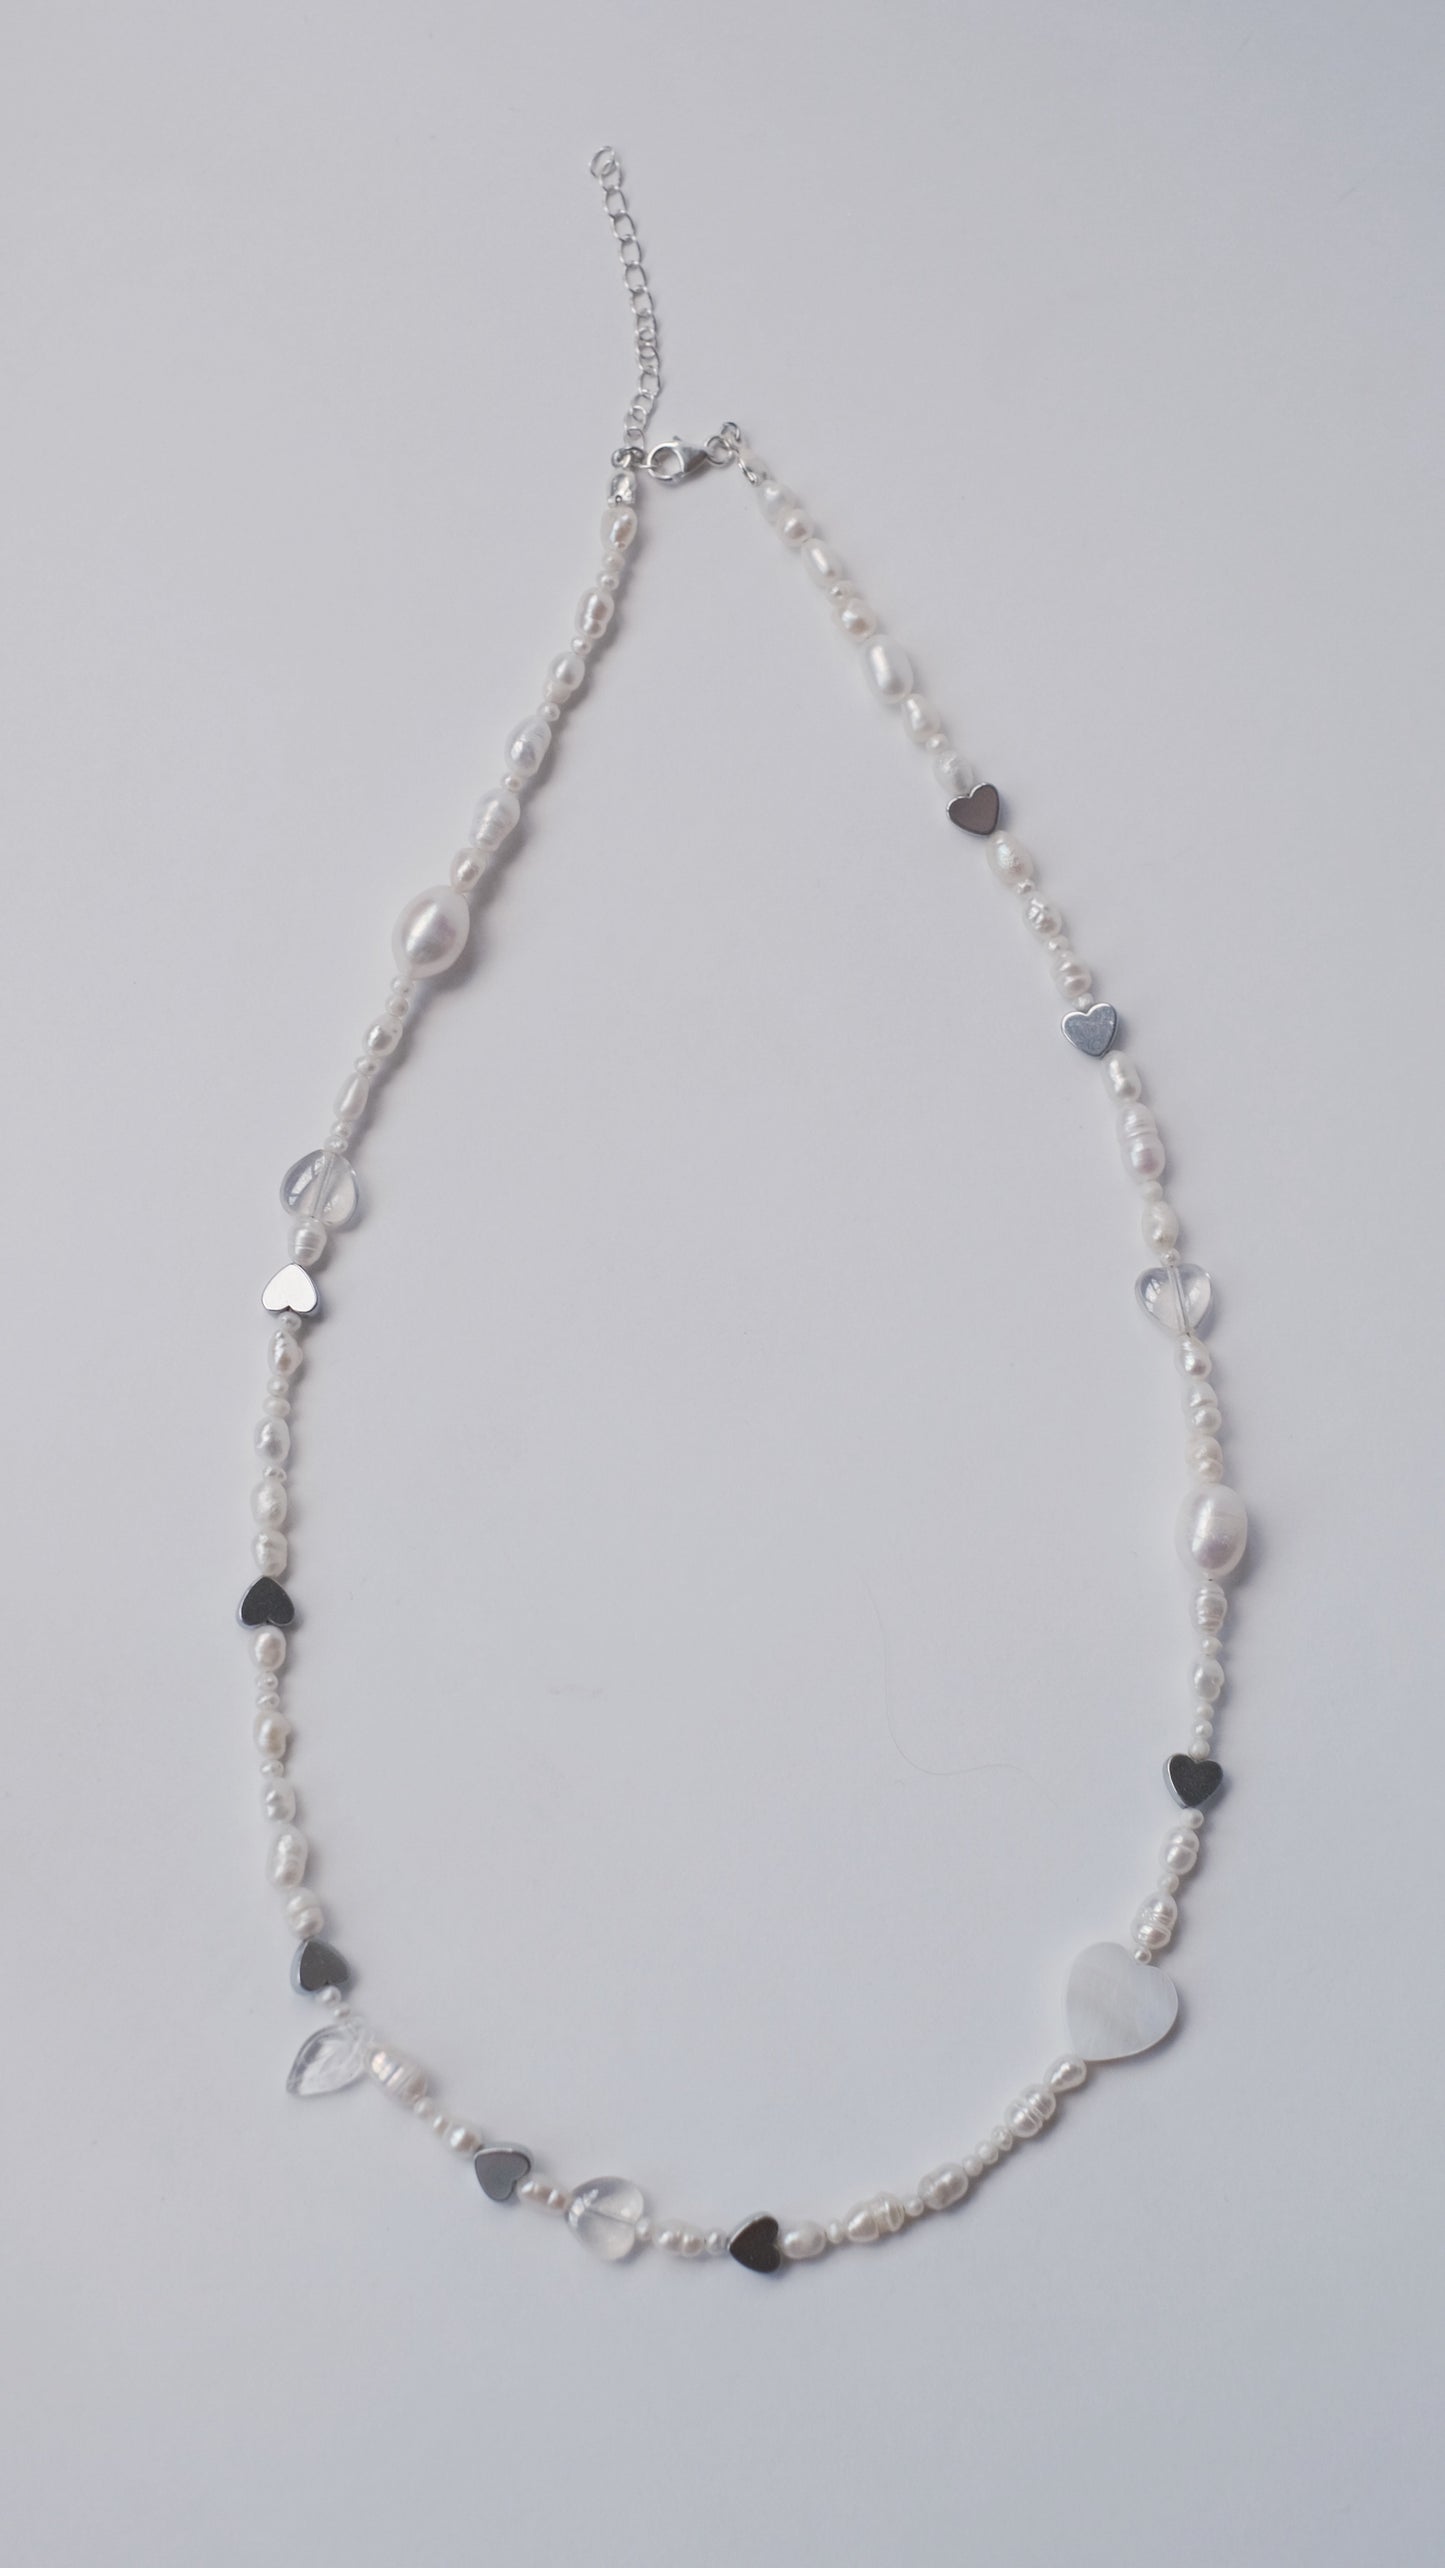 Necklace "Crystal love"